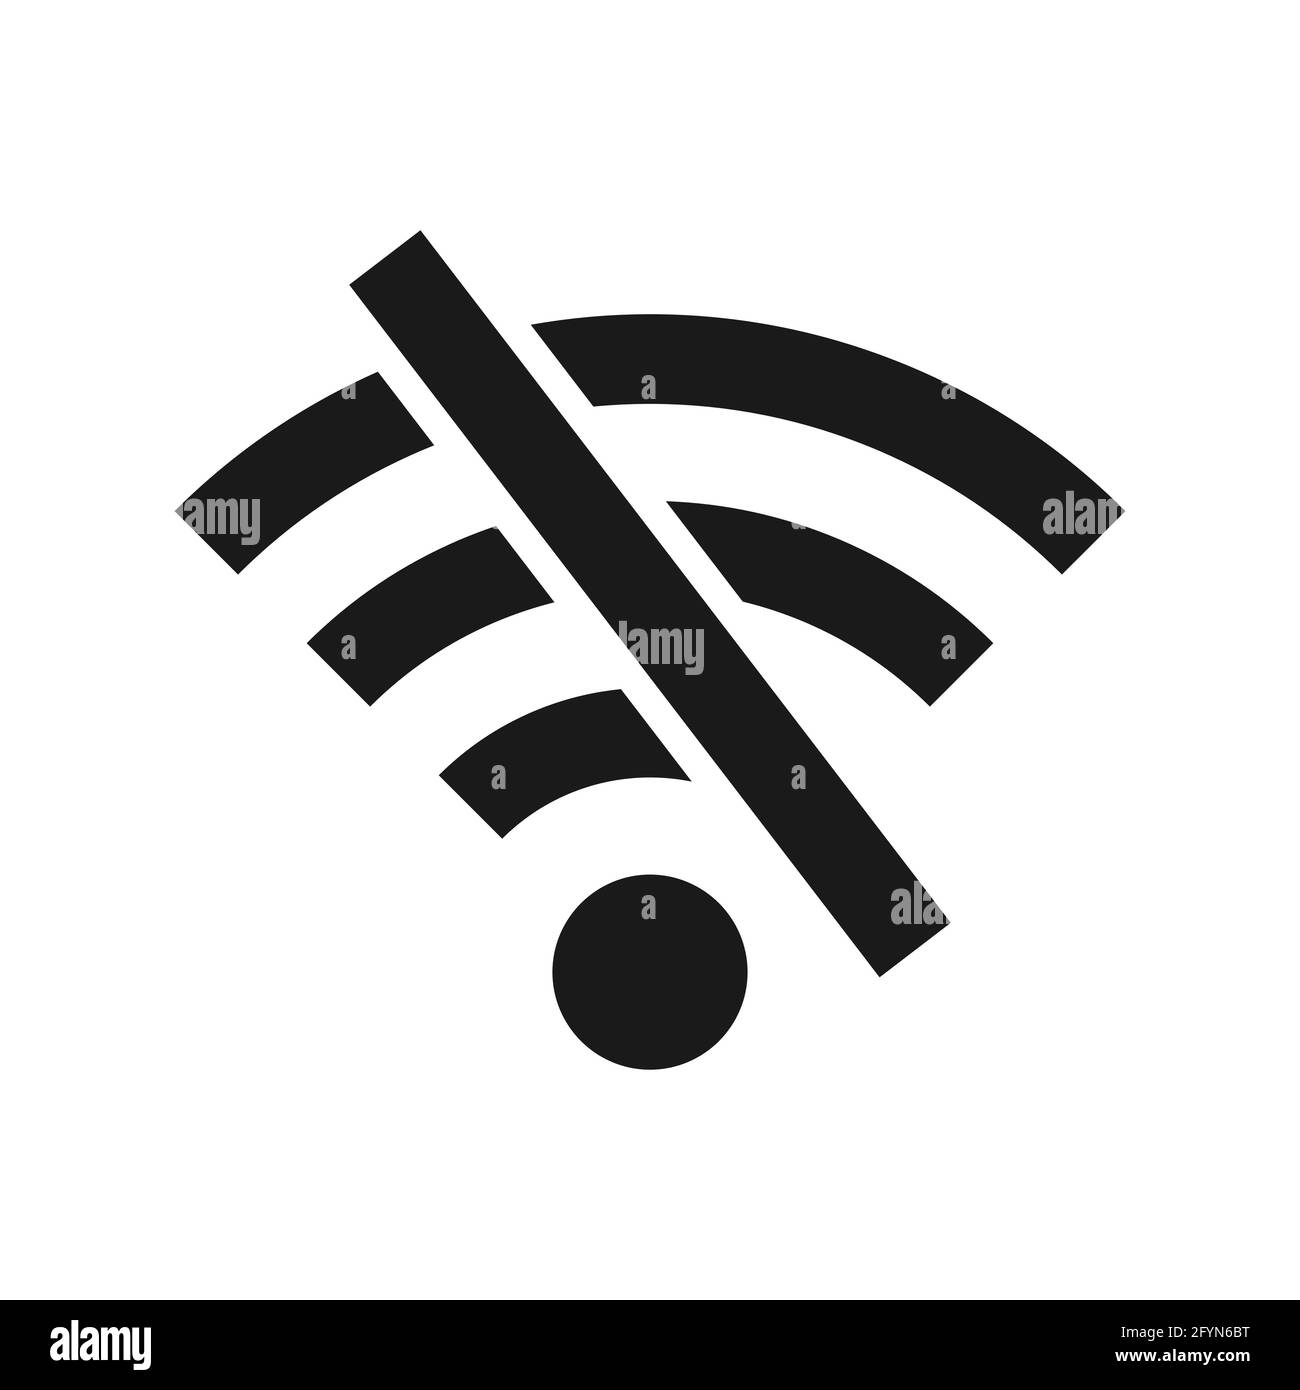 Offline wifi icon. Disconnected wireless network pictogram. No signal. Wireless technology symbol. Stock Vector